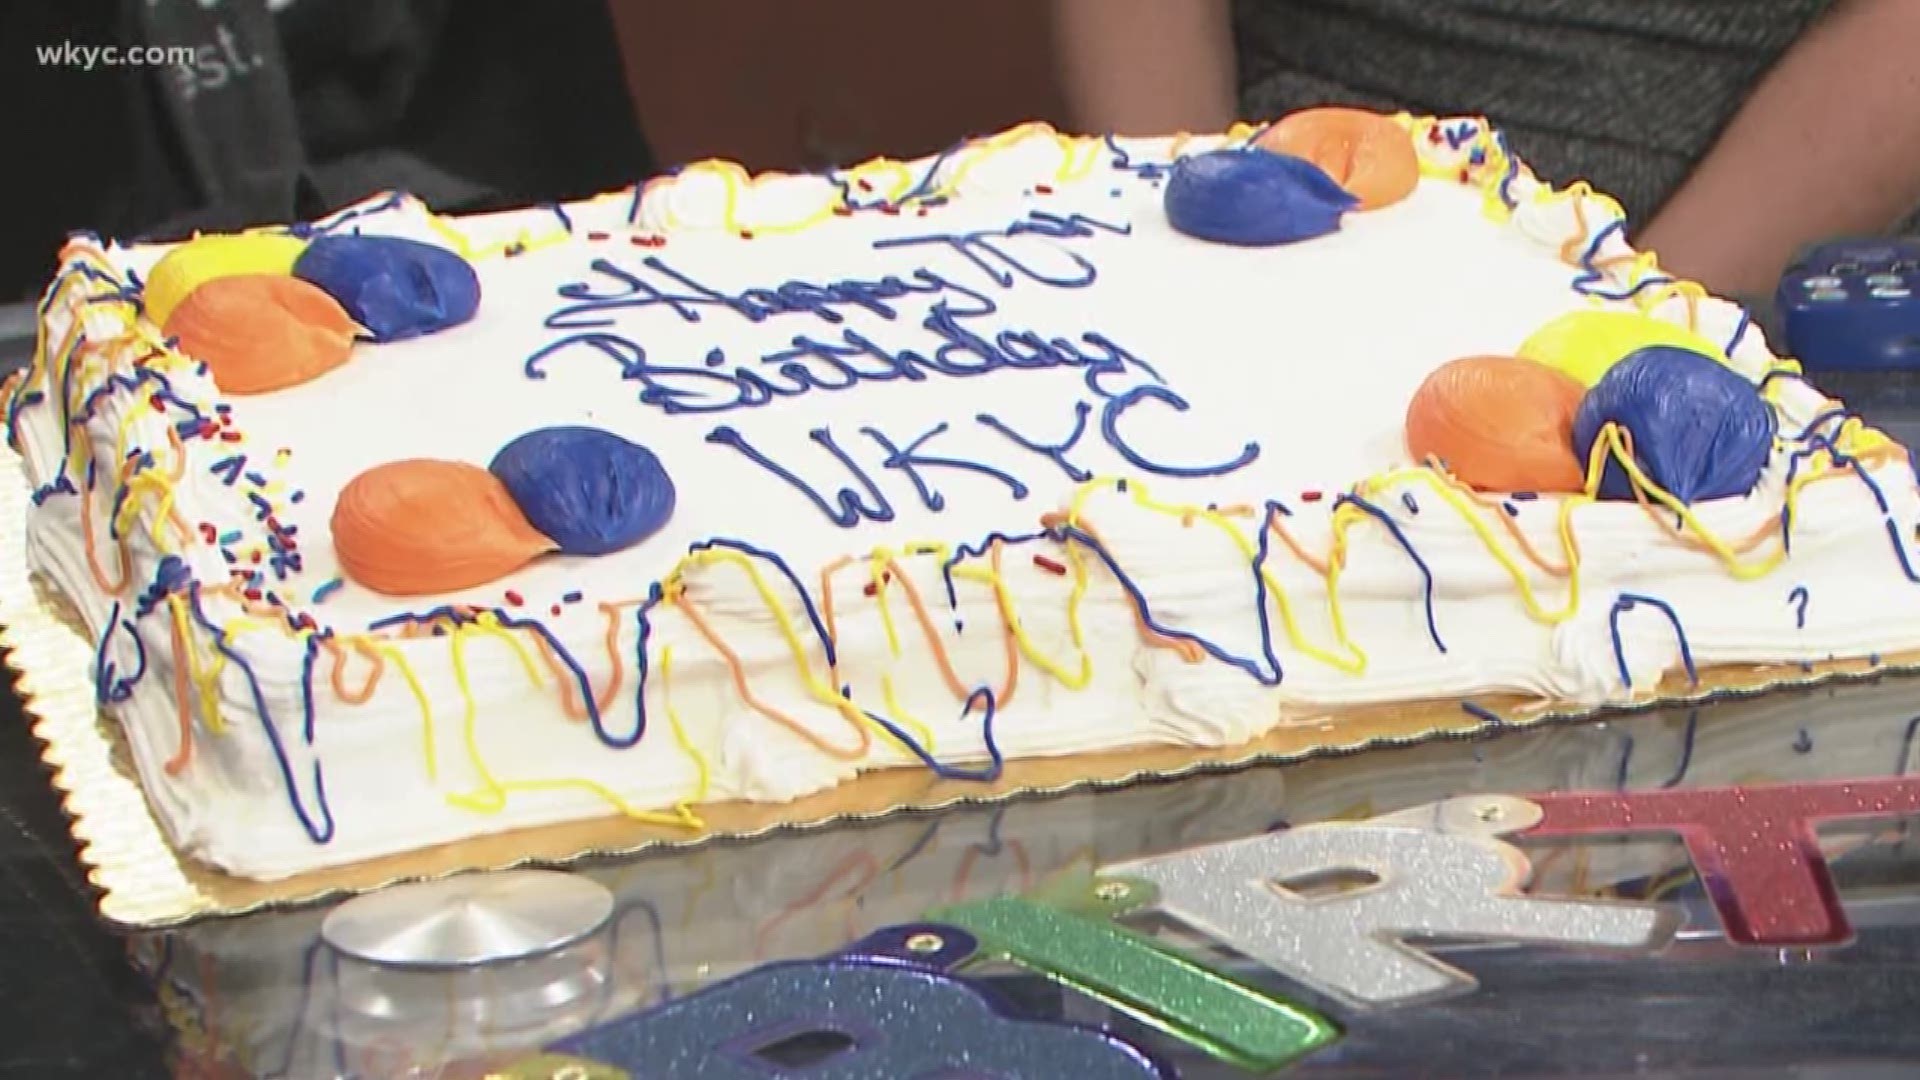 Oct. 31, 2018: It's our birthday! WKYC turns 70 today!